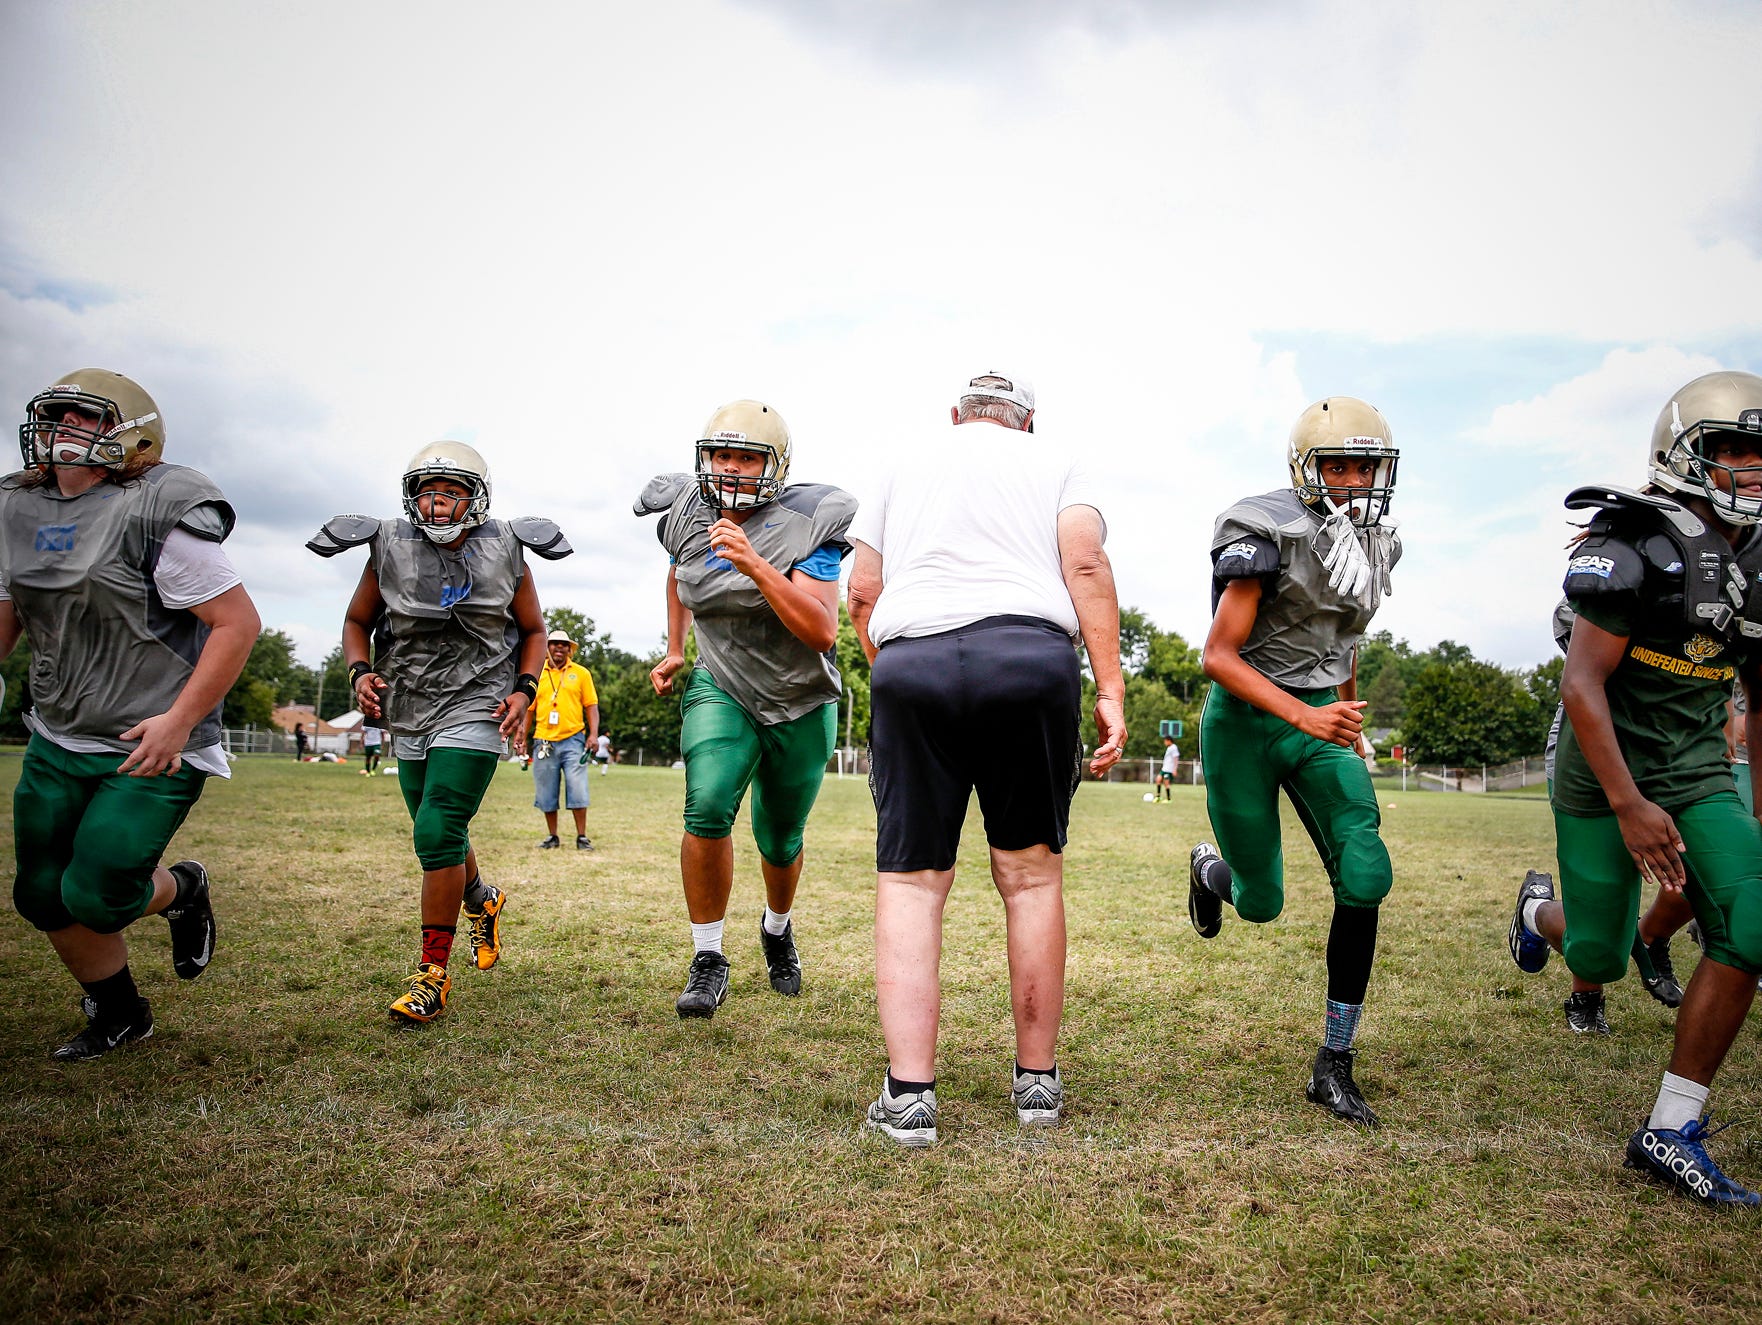 Crispus Attucks assistant coach Bob Ashford gets the team started with sprints during practice at Alonzo Watford Athletic Field on Aug. 17, 2016.